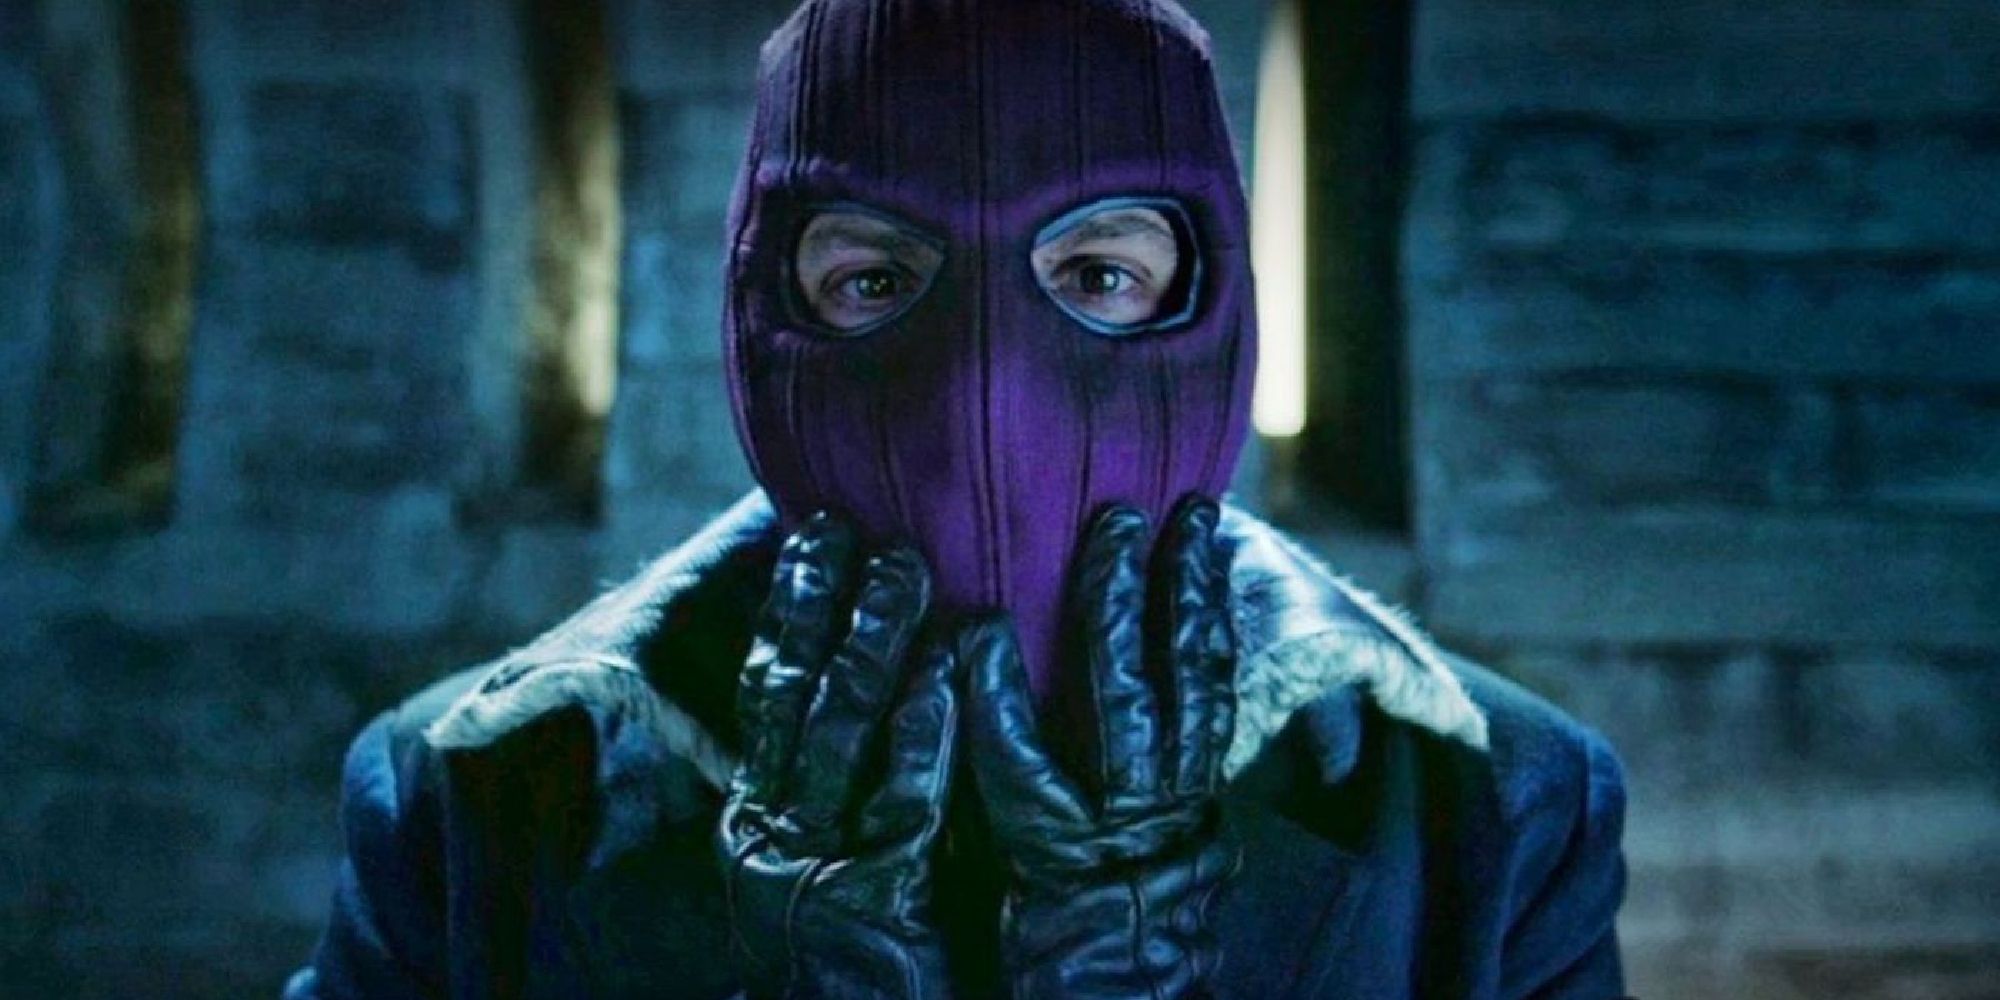 Baron Zemo donning a purple mask in Falcon & Winter Soldier